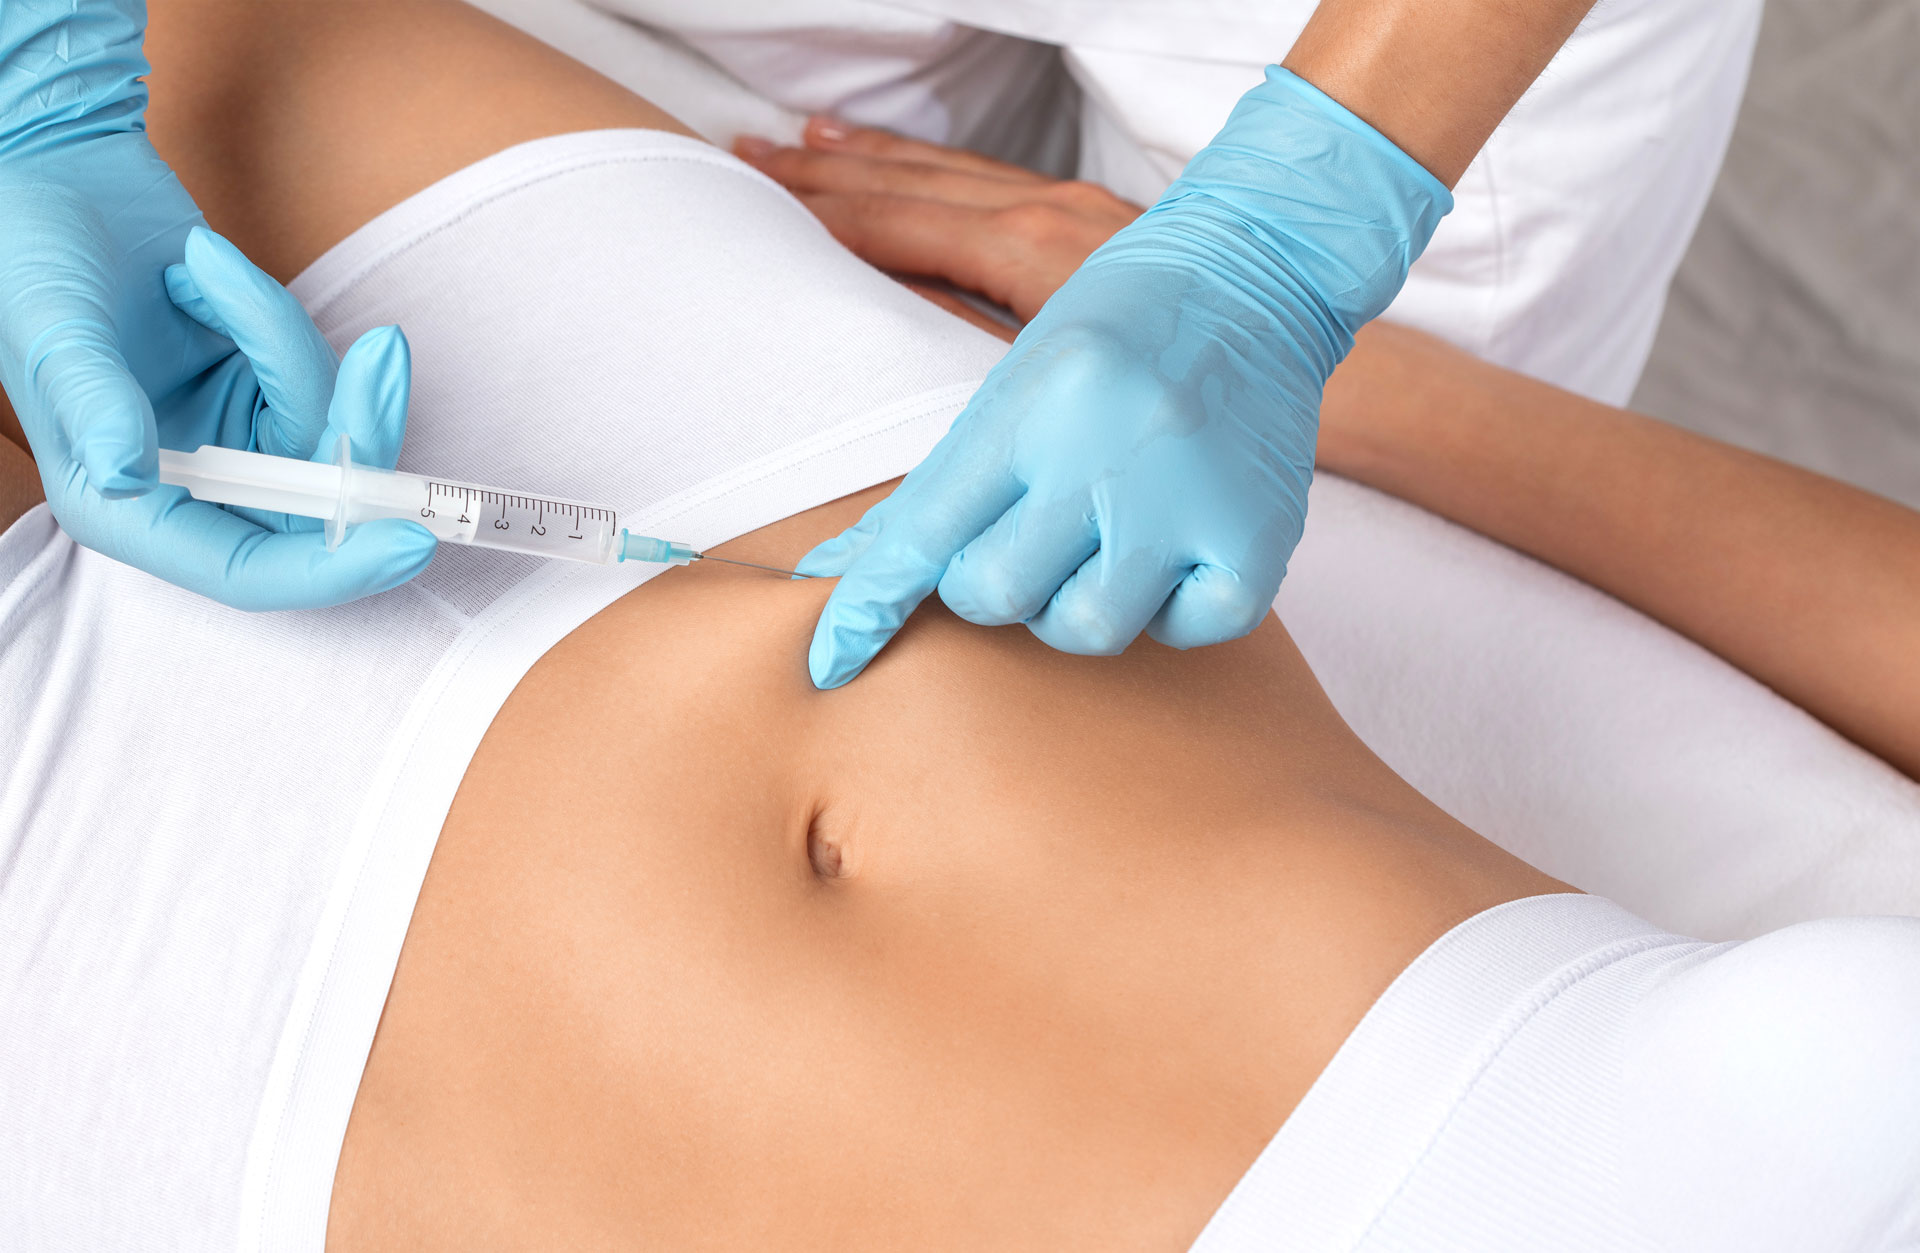 How do Lipotropic Injections Work for Weight Loss?